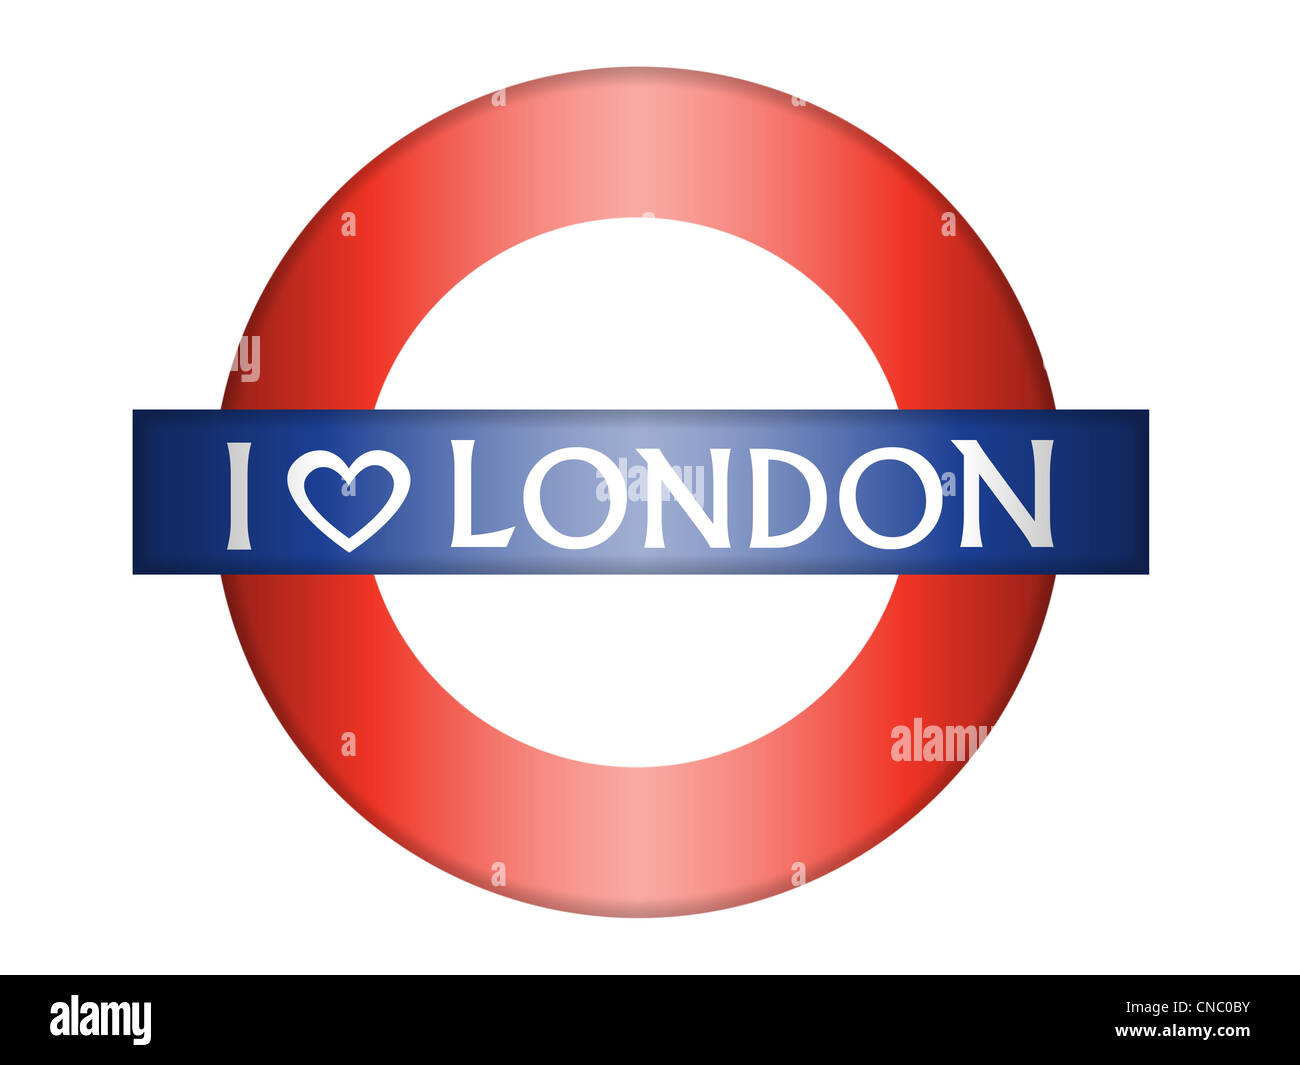 I love London sign in London Underground sign style Stock Photo